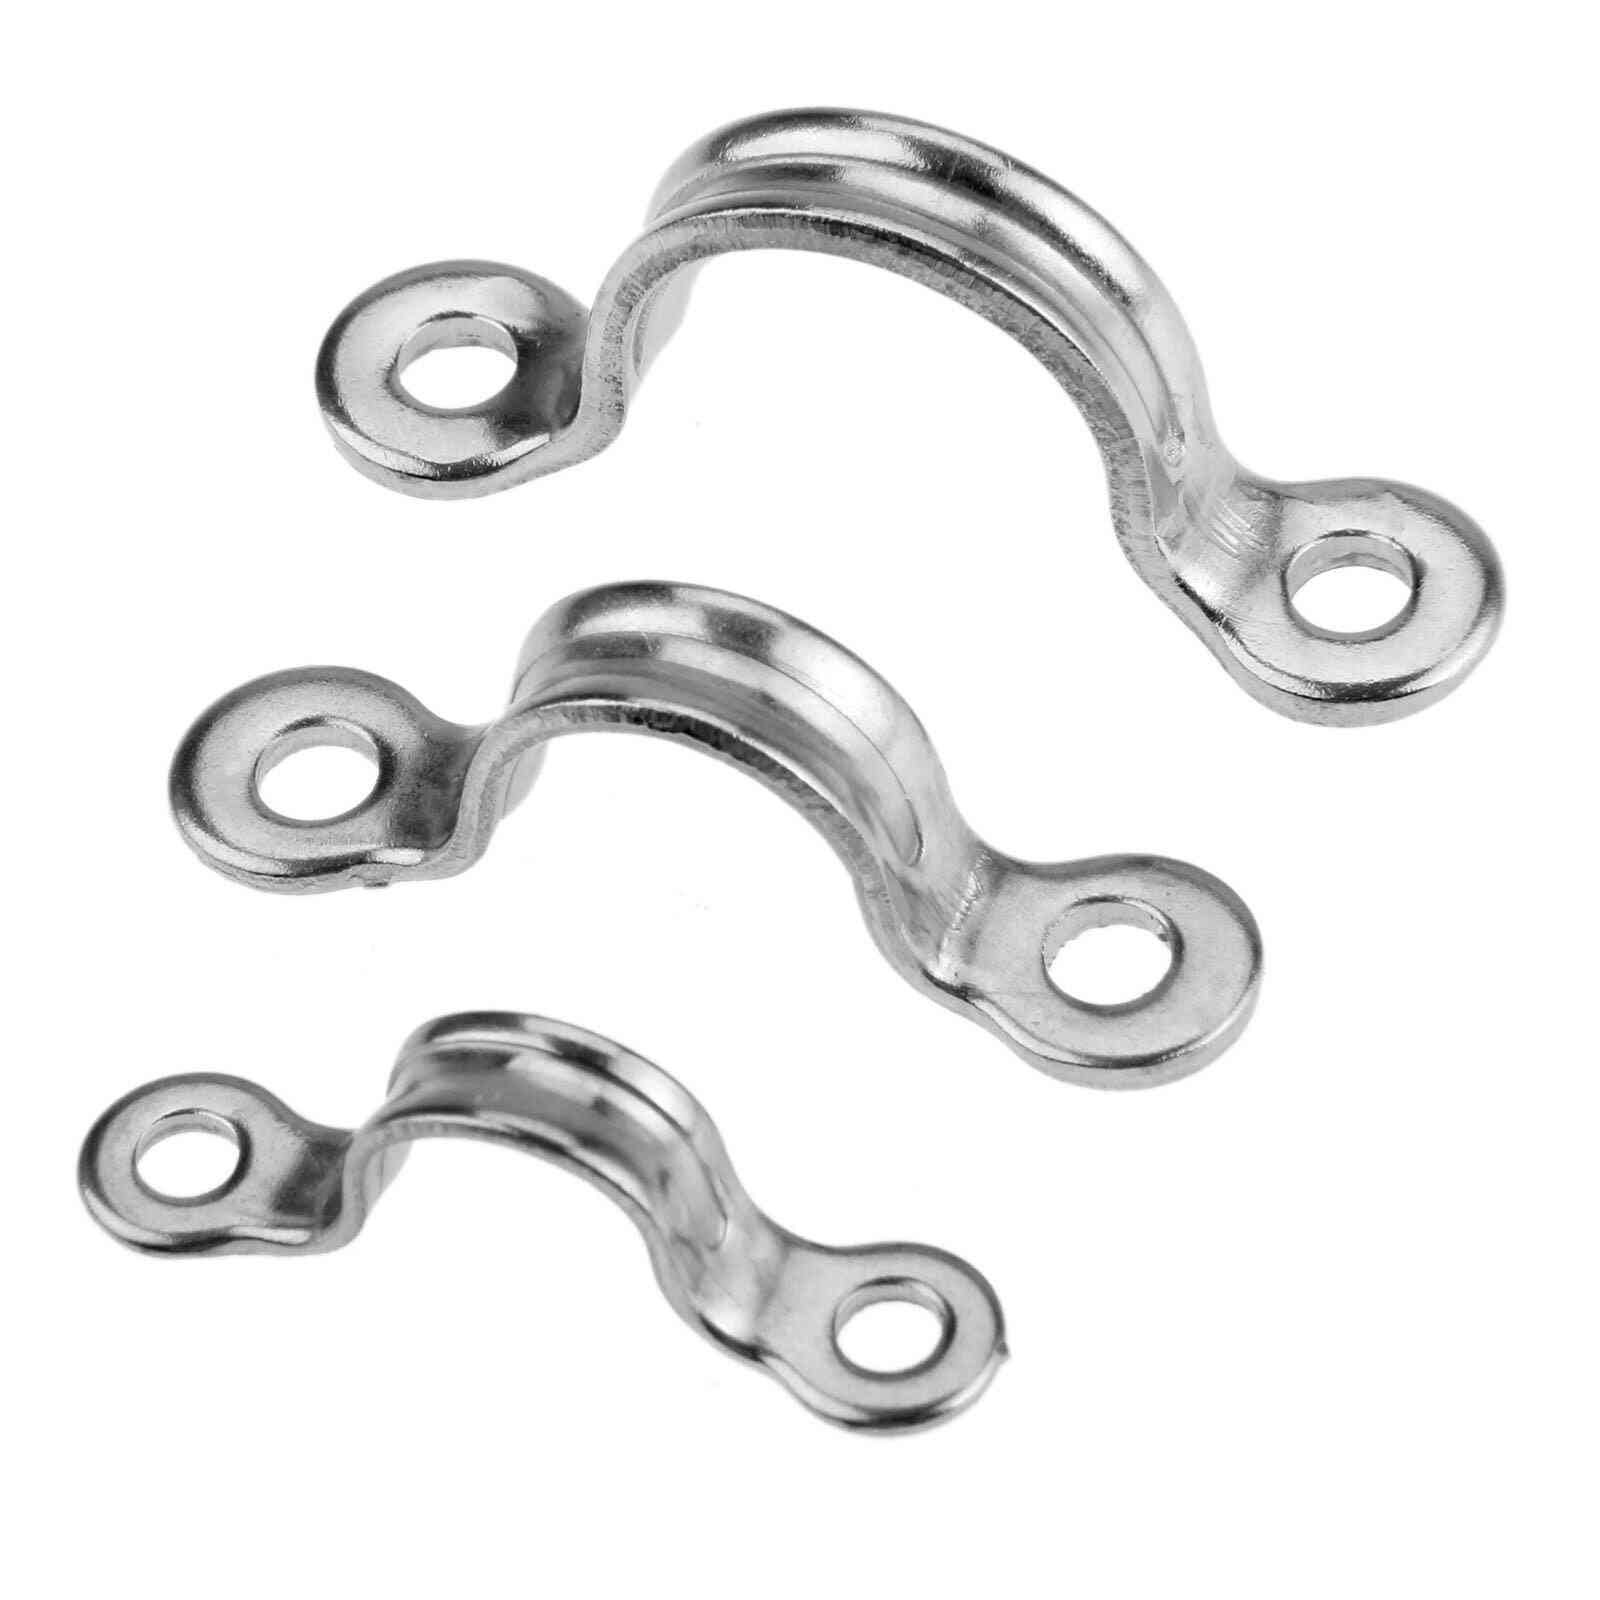 Marine Stainless Steel- Sheet Eye Lacing, Tie Down Anchor Straps, Boat Accessories